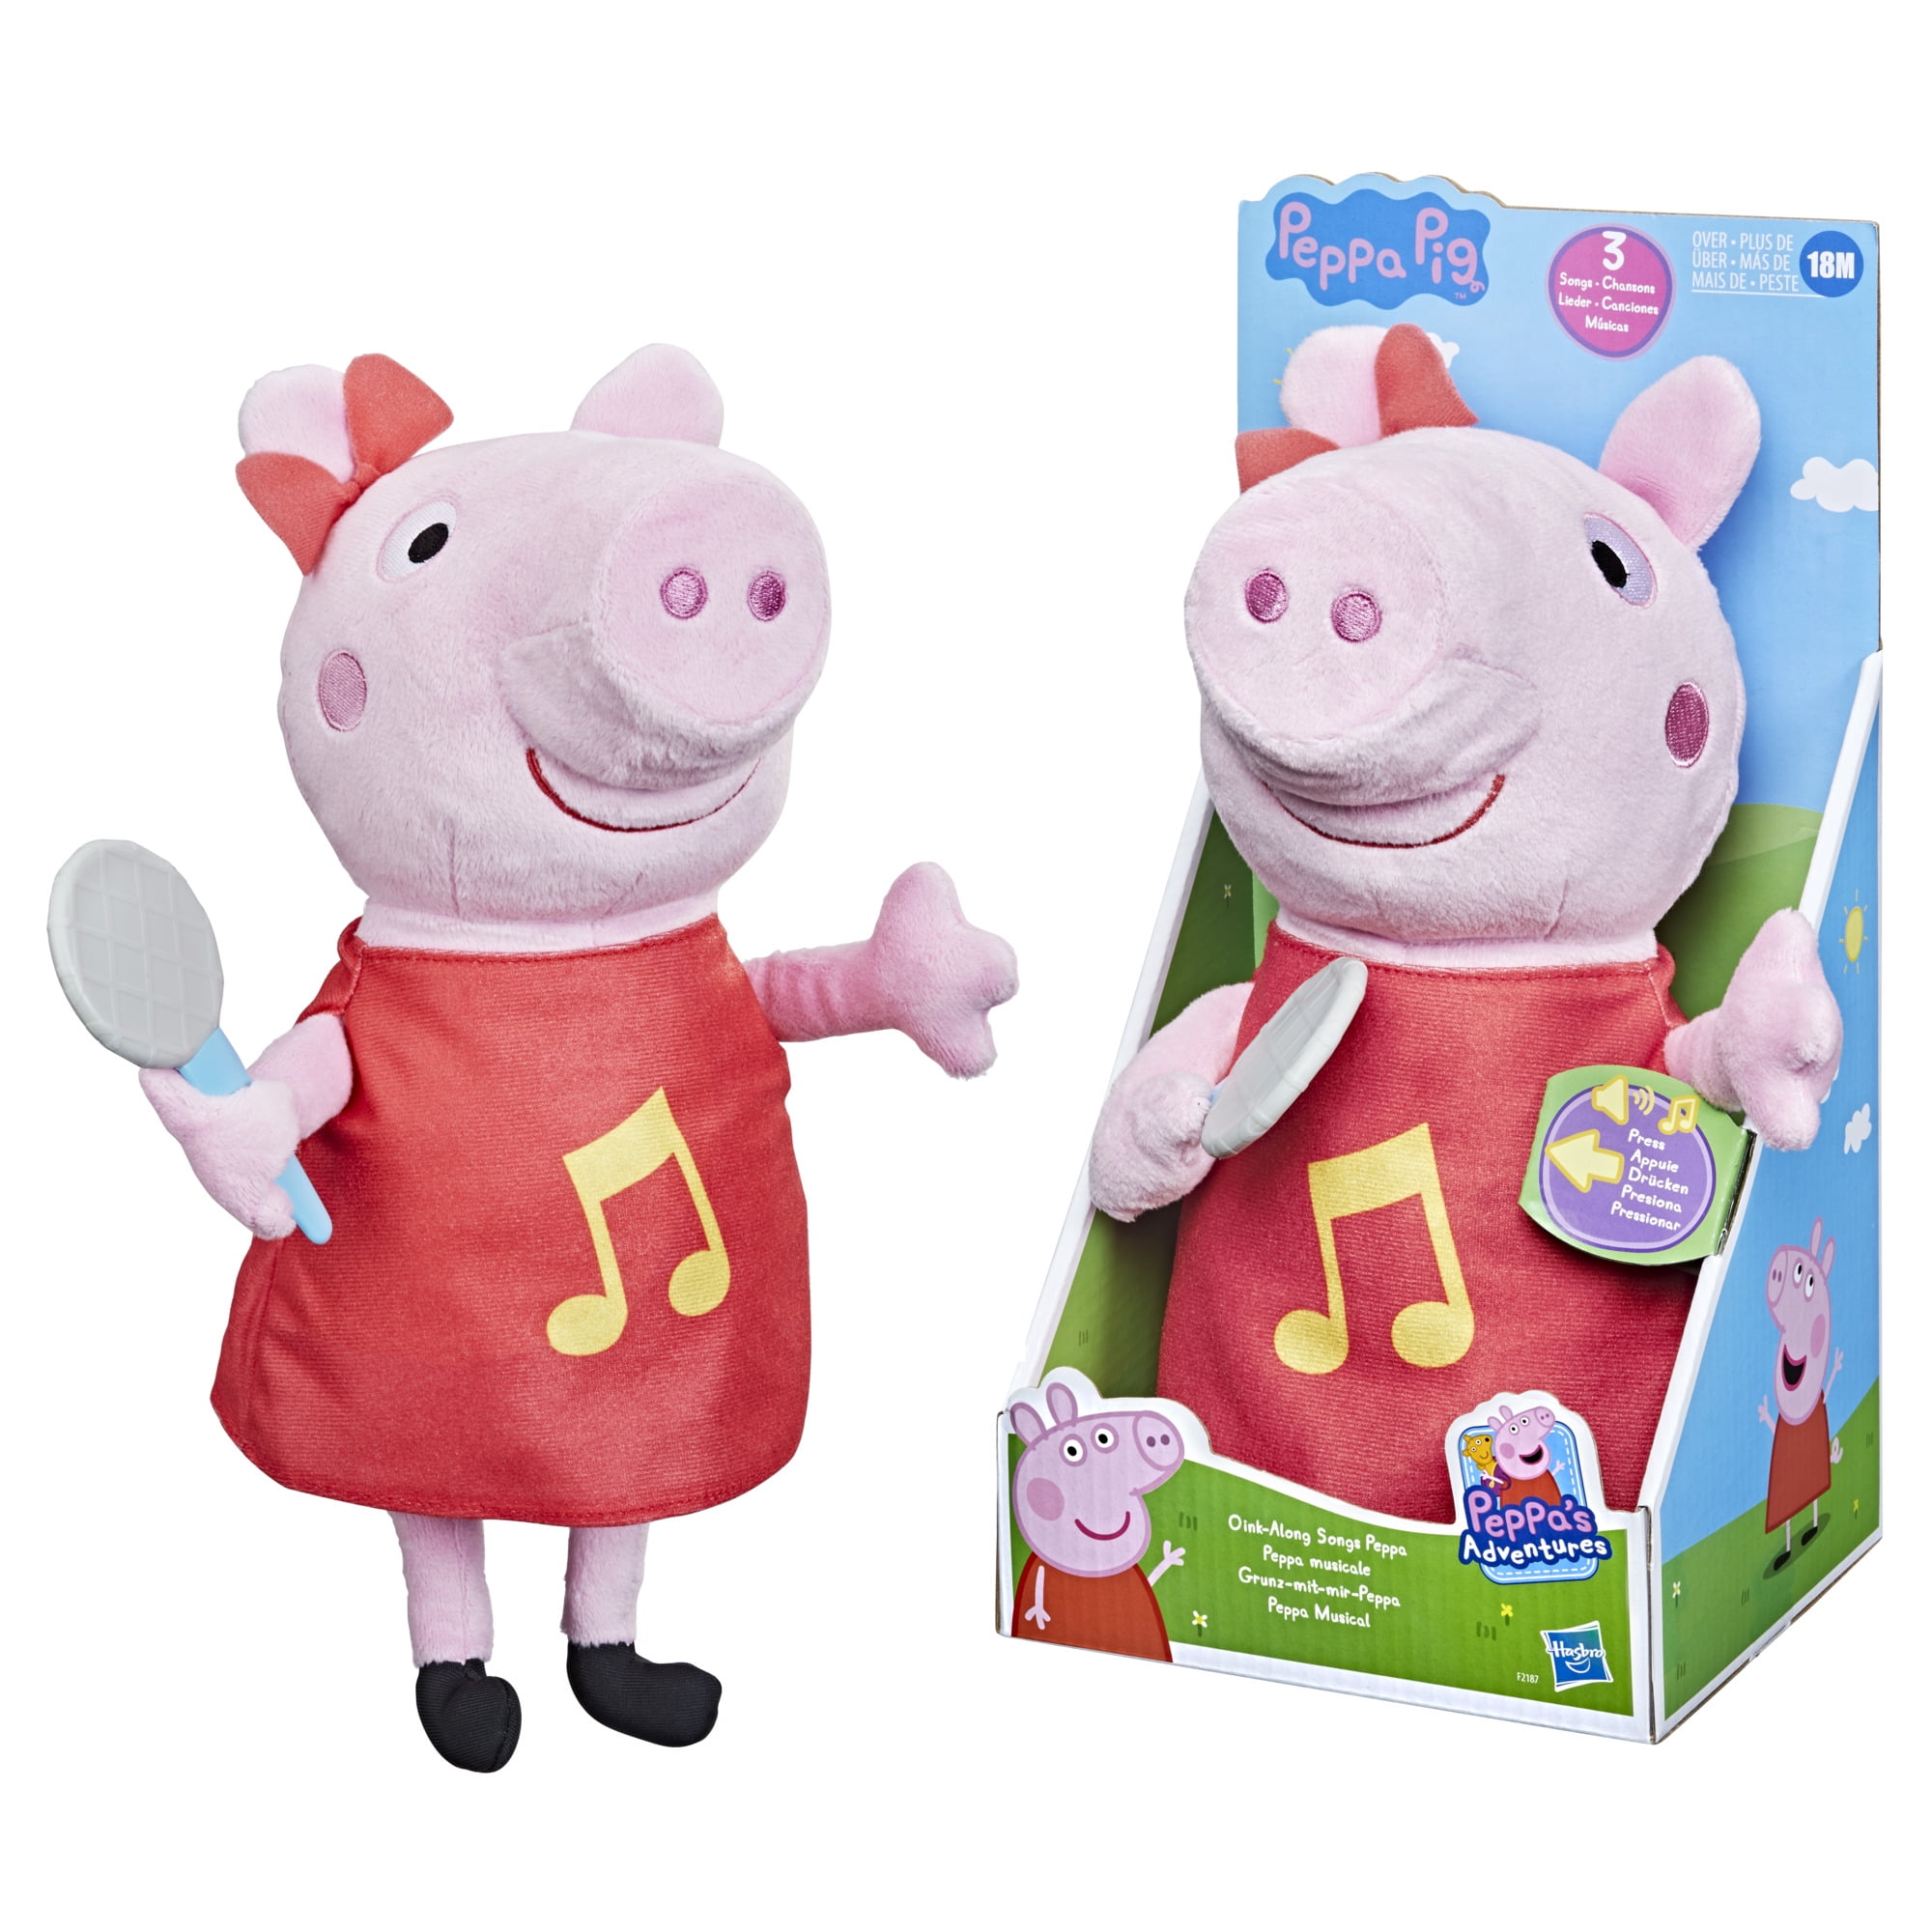 Peppa Pig Plush Toy with Sound 